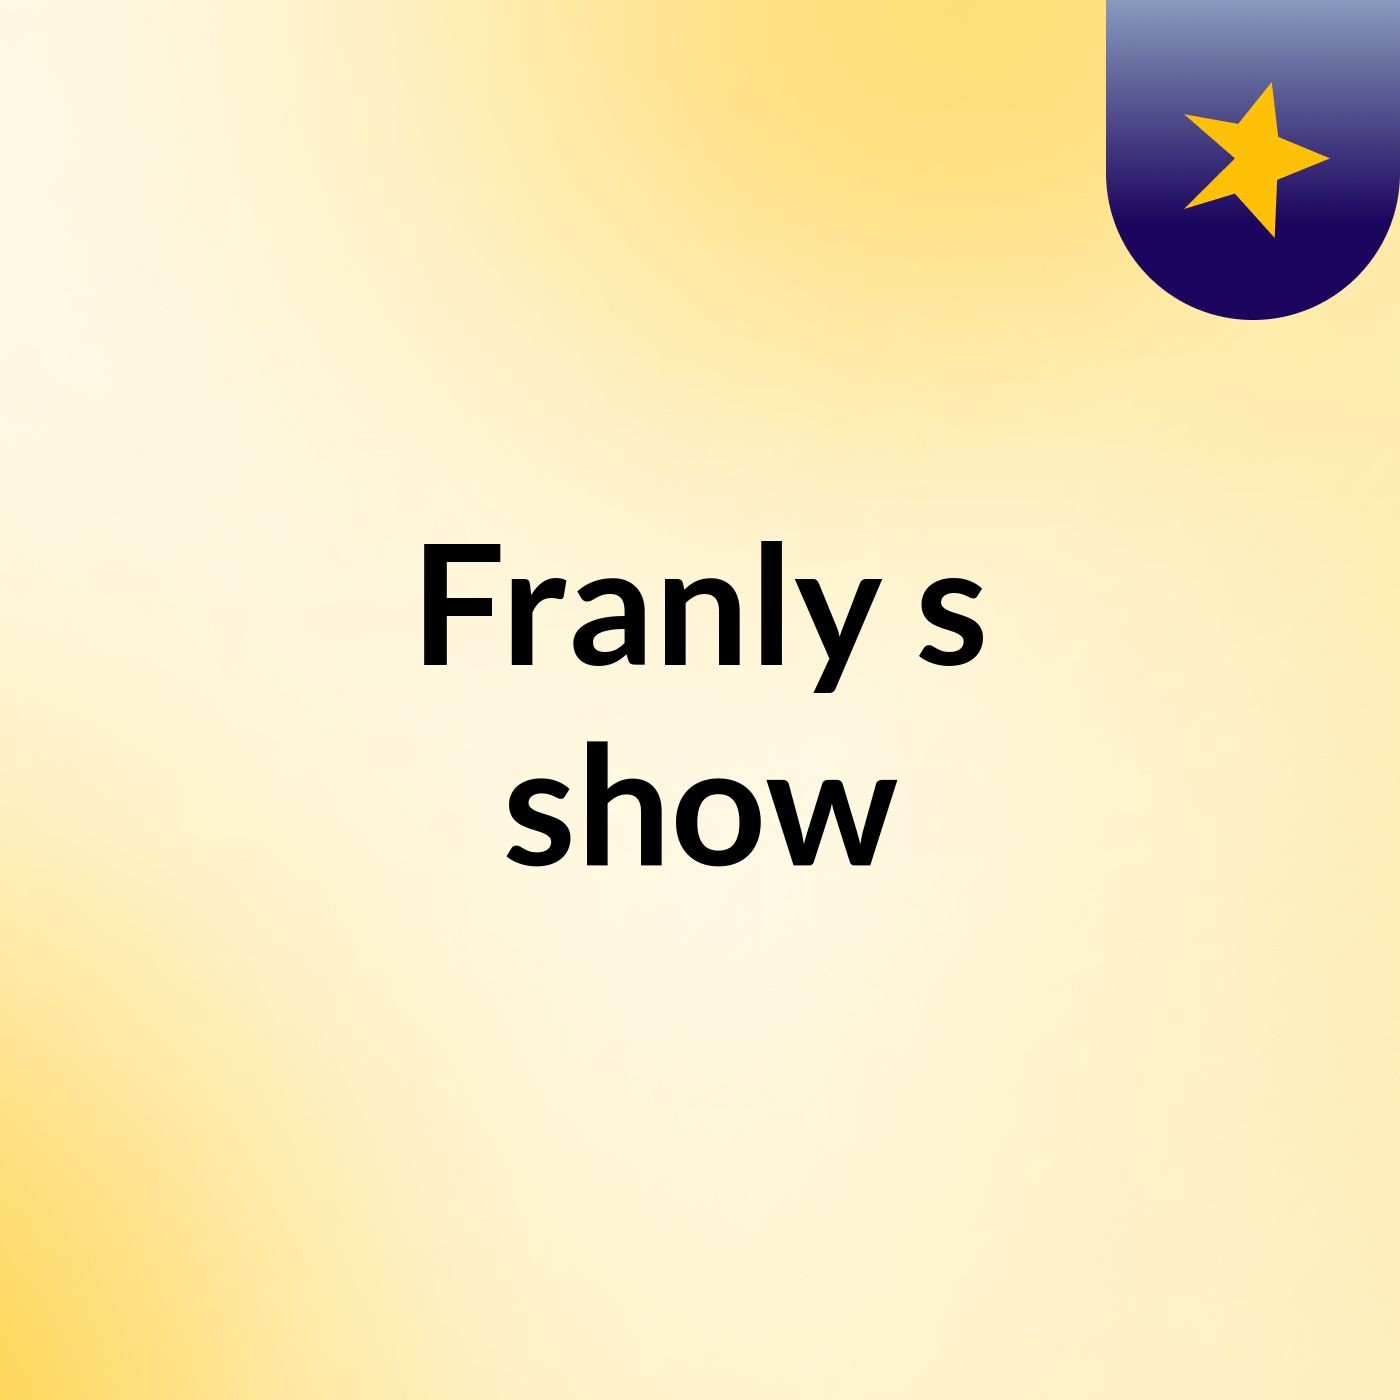 Franly's show